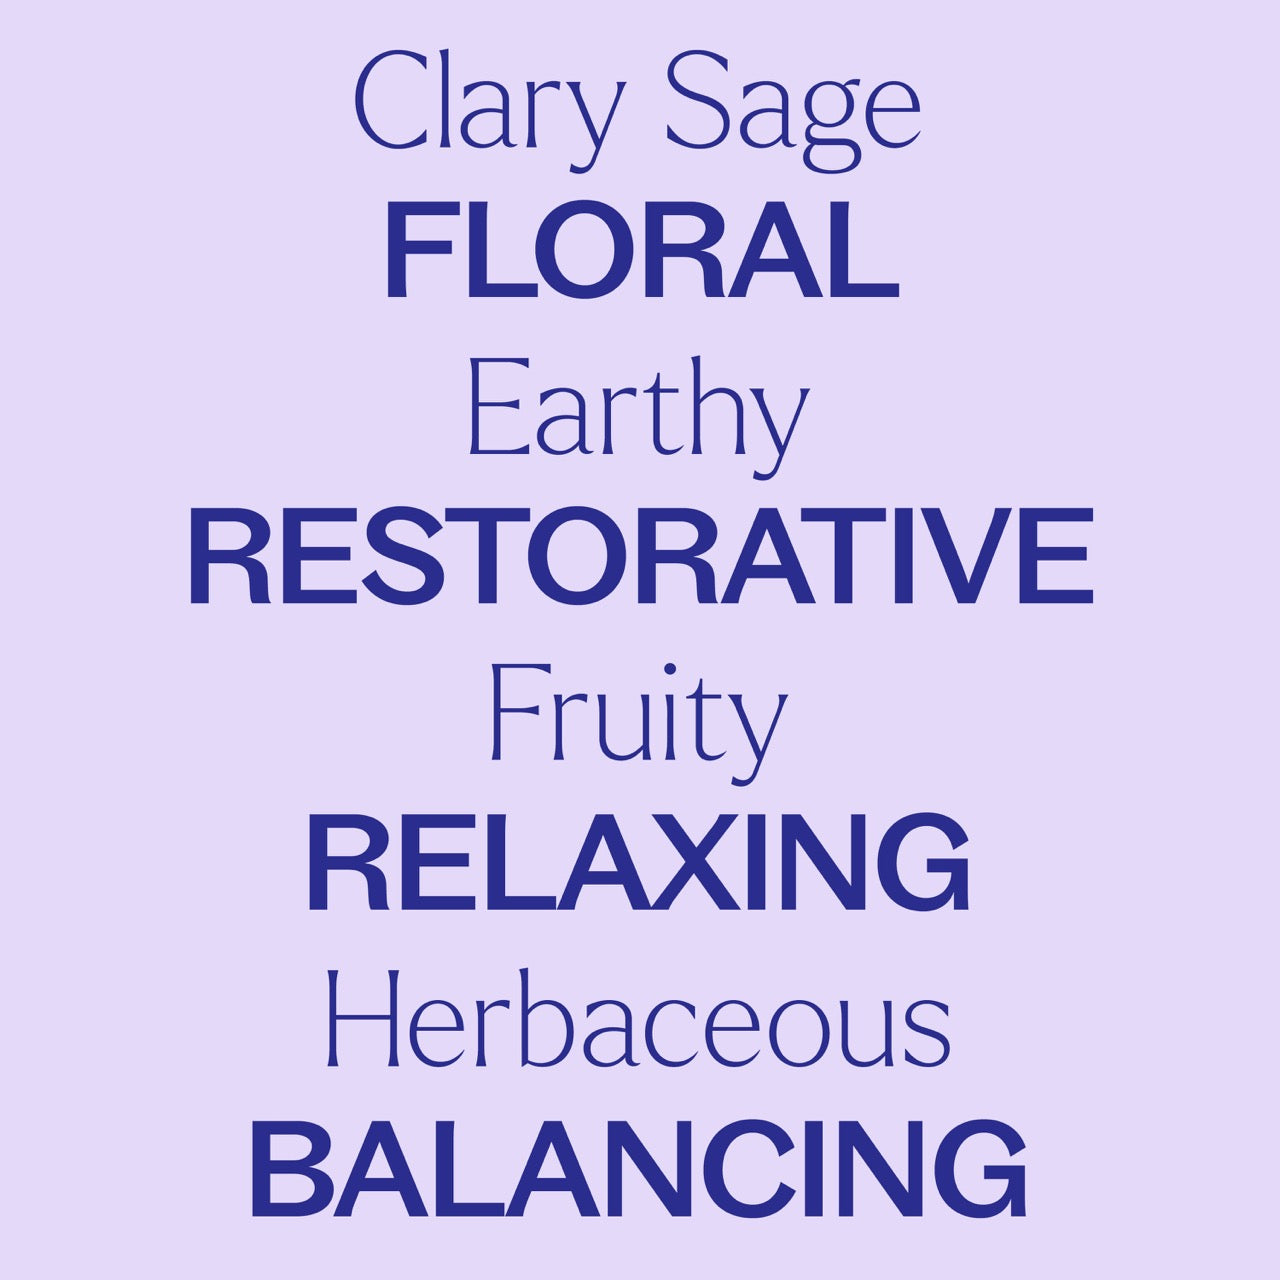 Clary Sage Essential Oil Pre-Diluted Roll-On key features: Floral, earthy, restorative, fruity, relaxing, herbaceous, and balancing